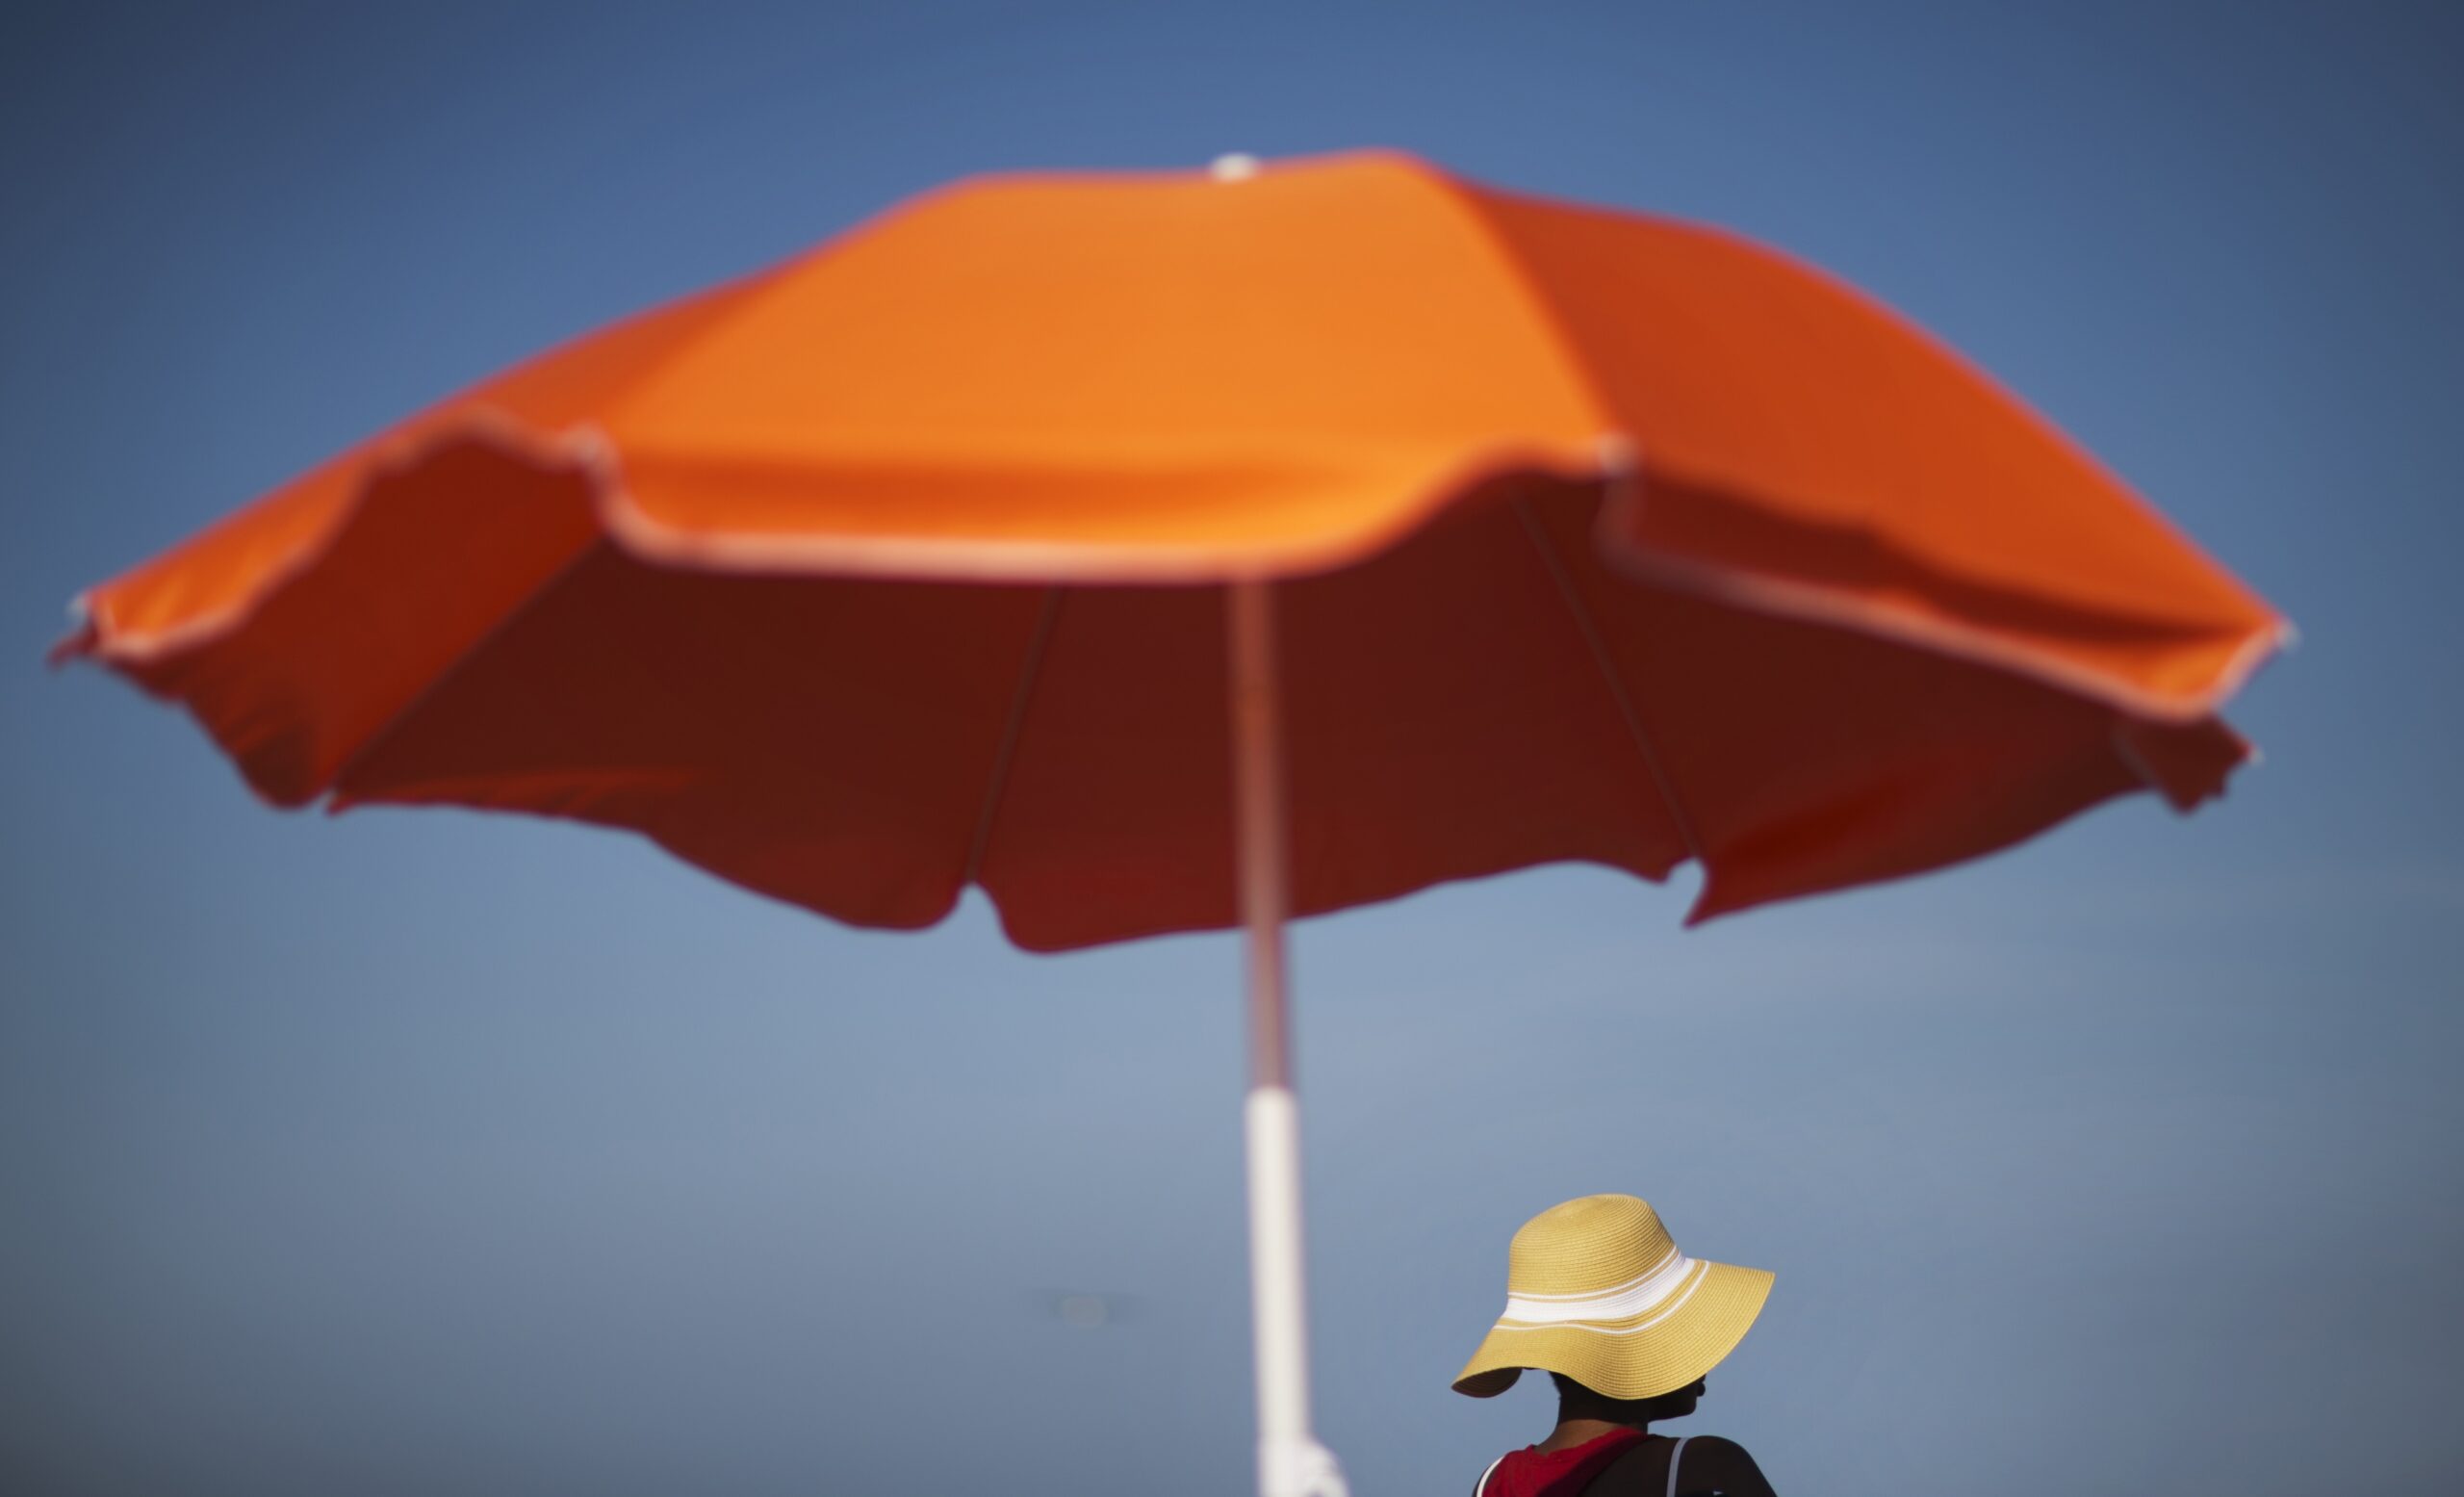 Mayo Clinic is reminding people to take sun damage seriously